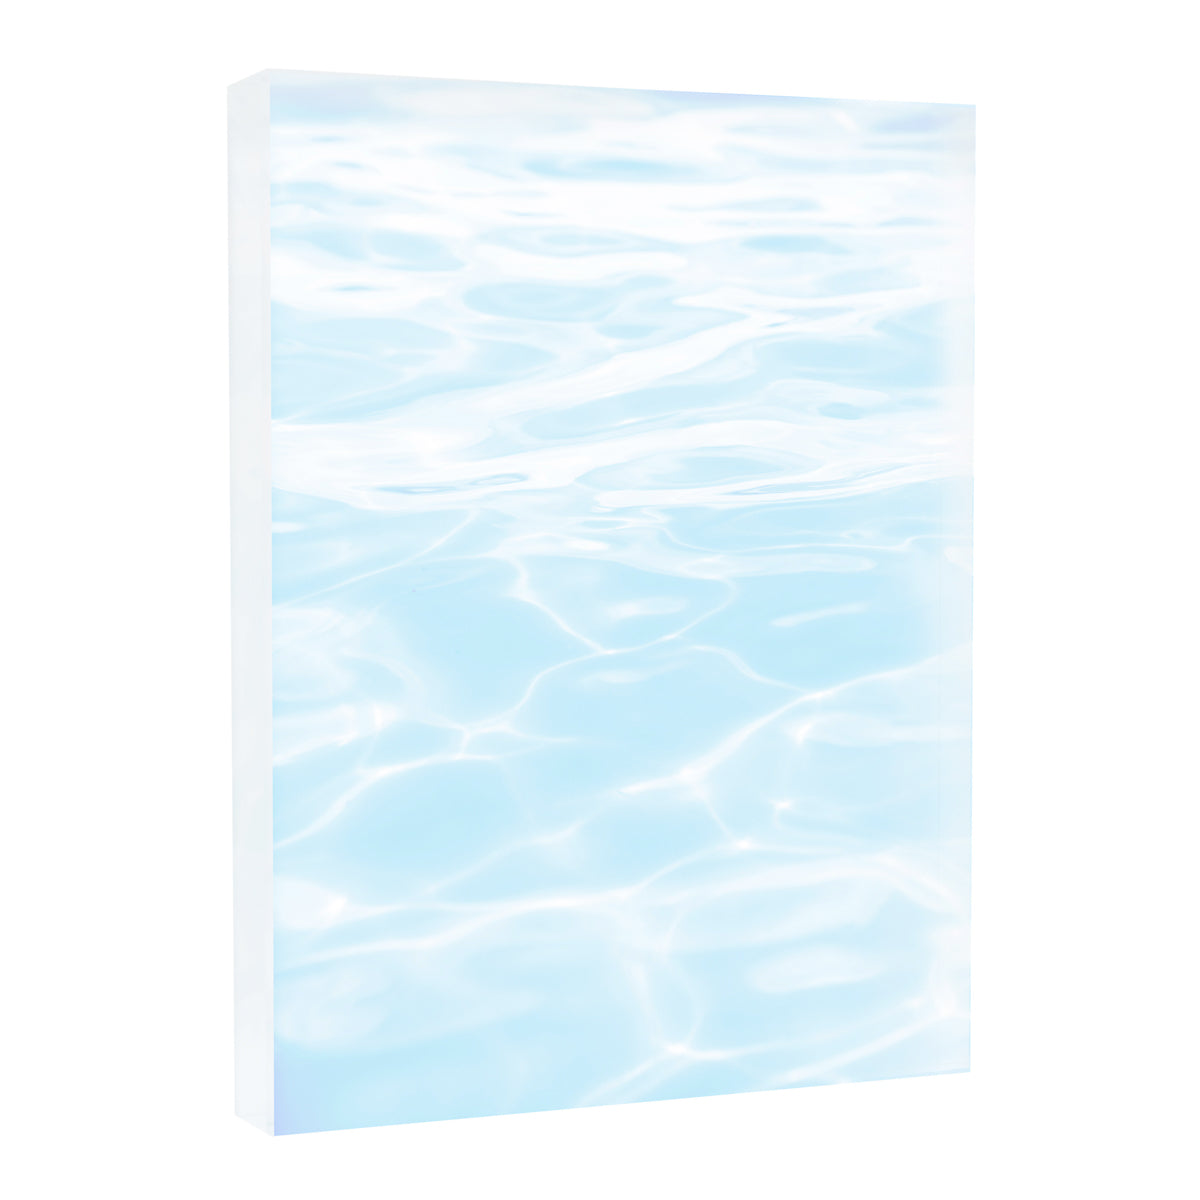 Lucite Block : Cool Blue Water Poolscape